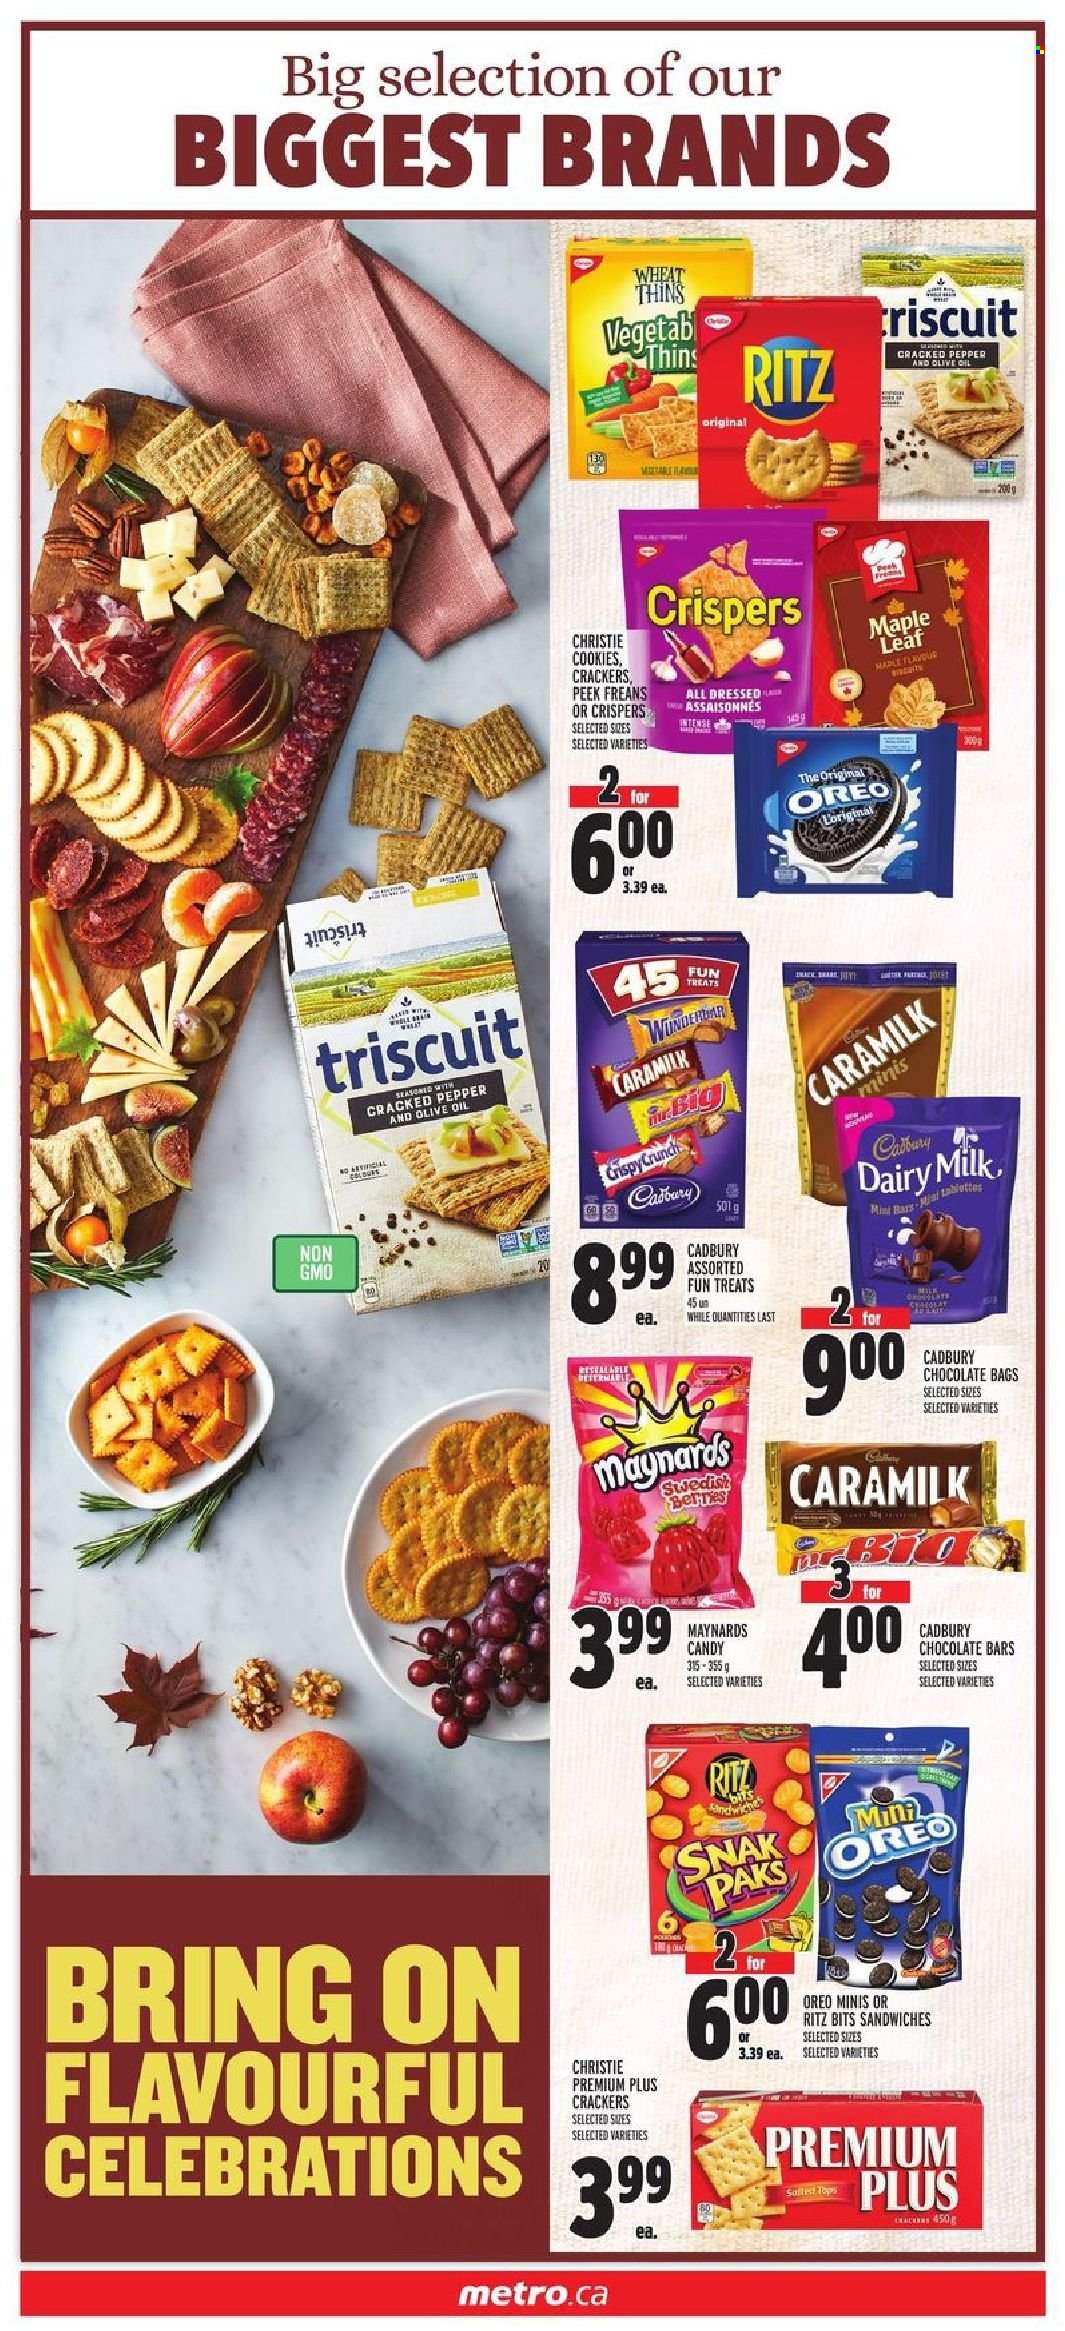 thumbnail - Metro Flyer - September 23, 2021 - September 29, 2021 - Sales products - sandwich, cookies, Celebration, crackers, Cadbury, Dairy Milk, RITZ, chocolate bar, Thins, pepper, olive oil, oil, Oreo. Page 12.